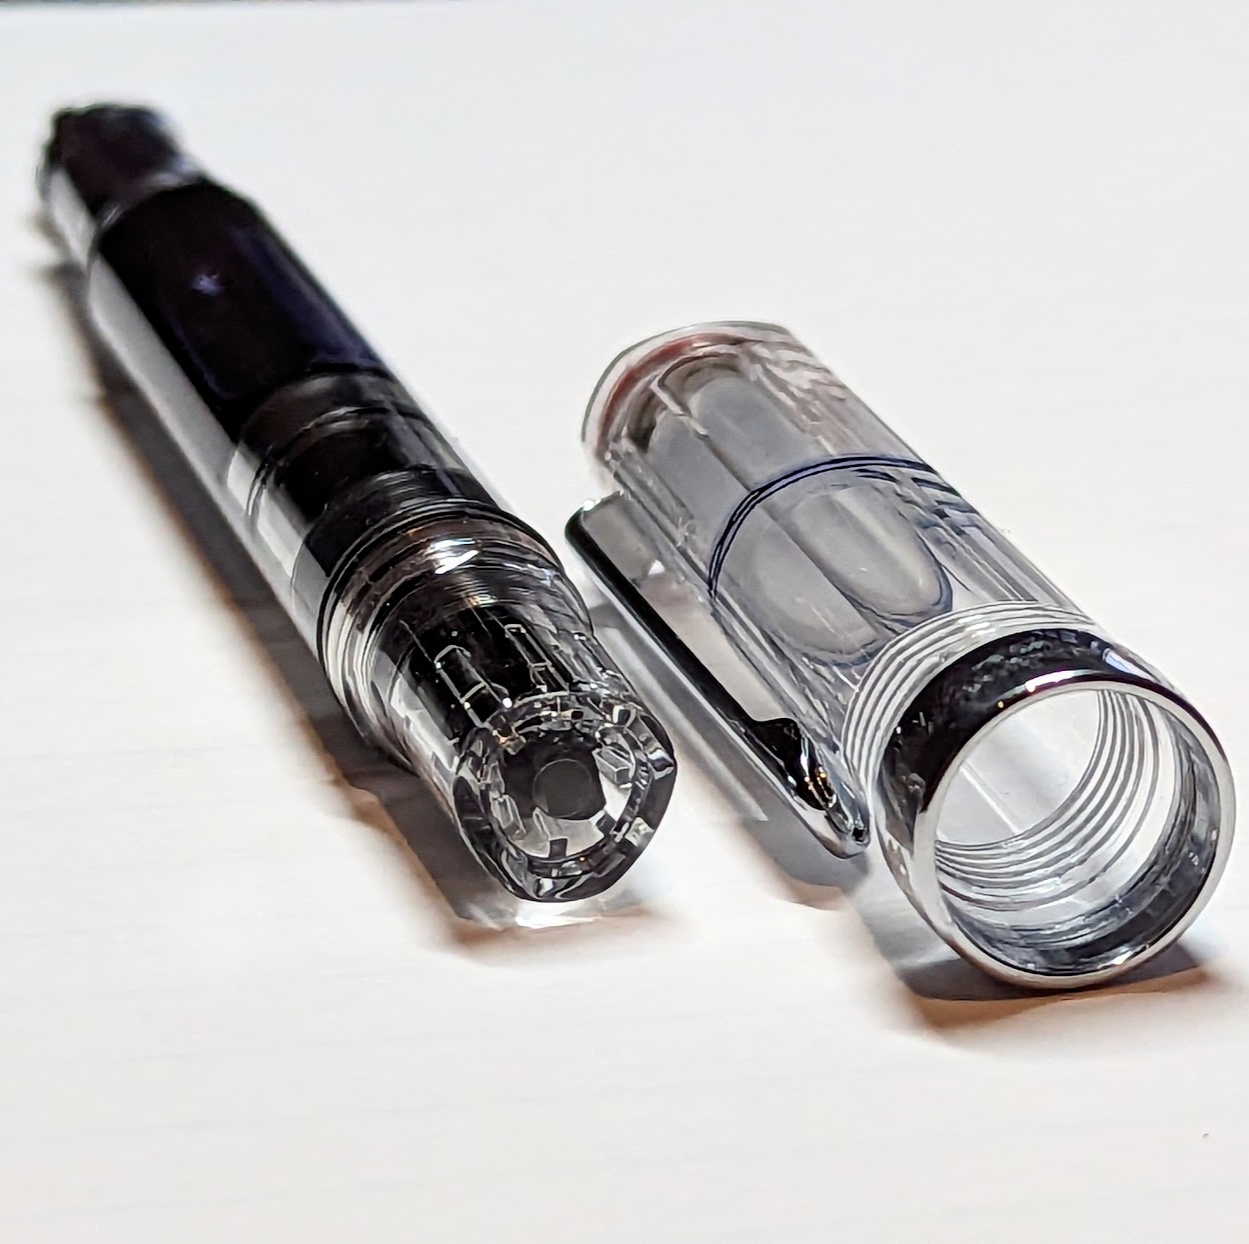 A picture of the TWSBI ECO Pen and Cap